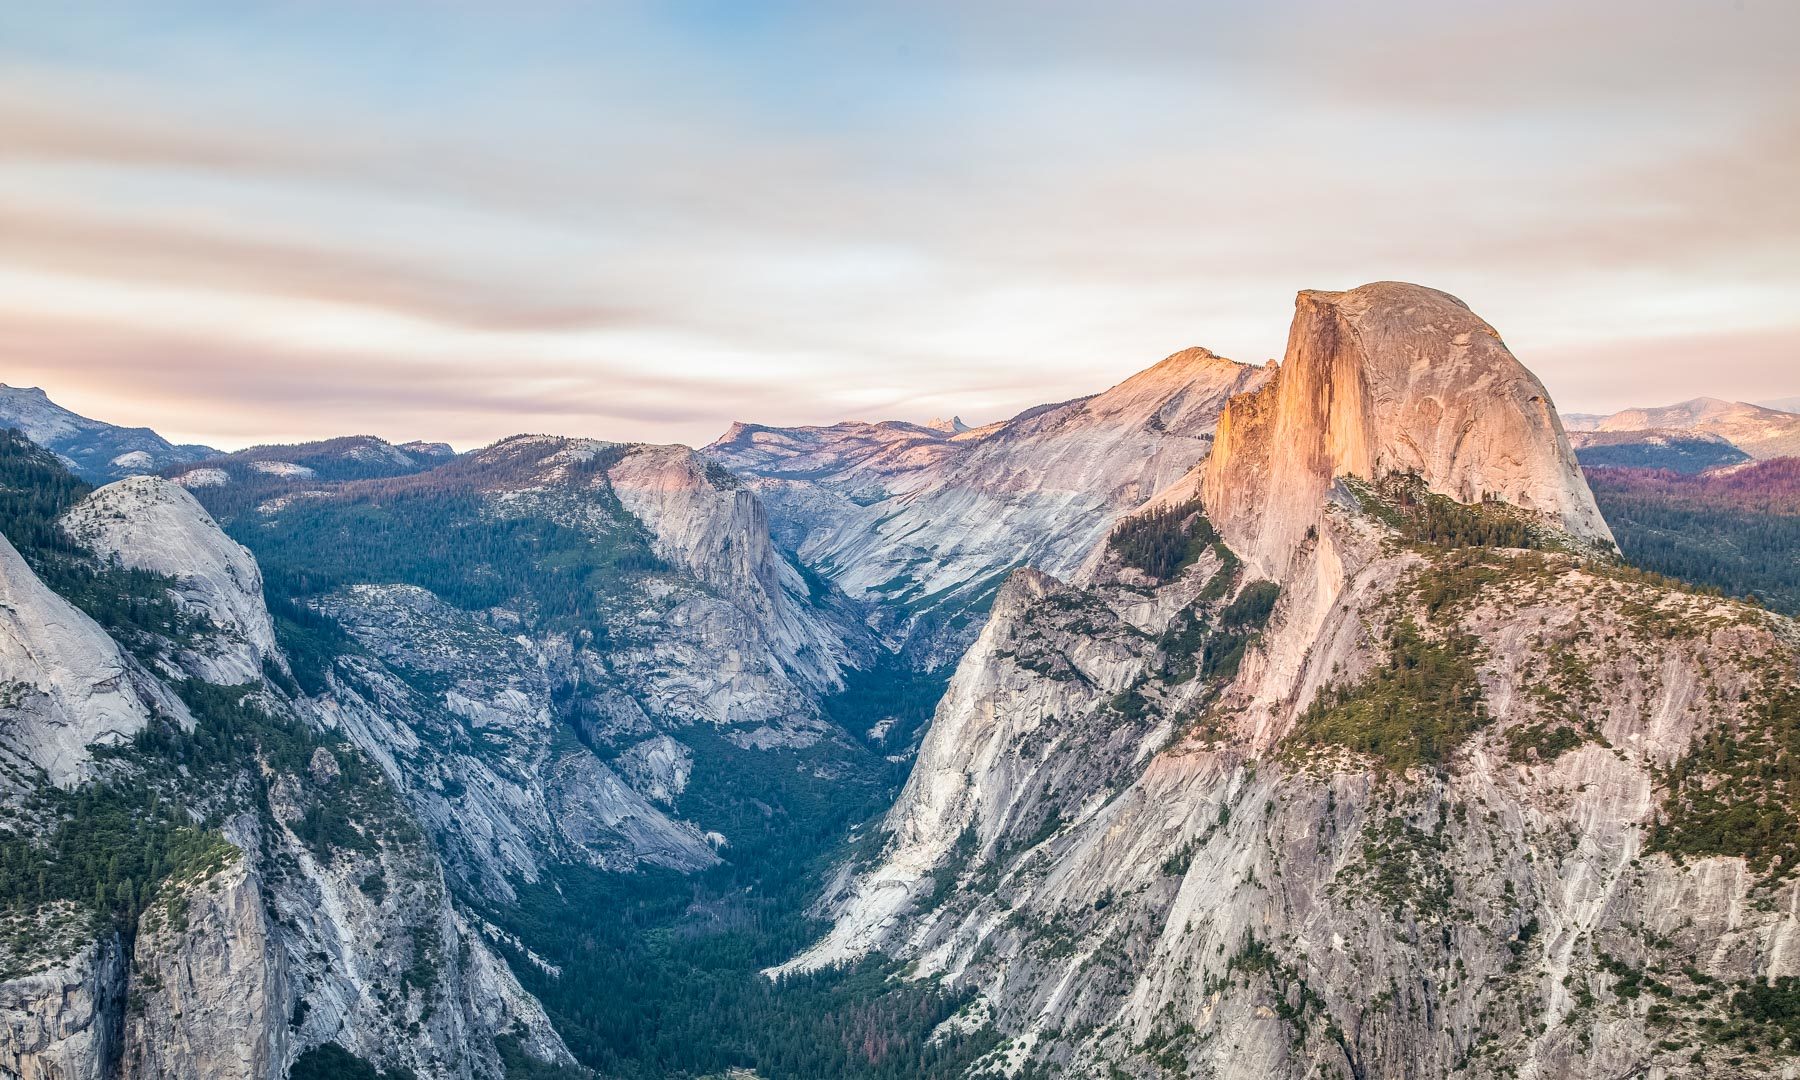 Best Airbnbs in Yosemite: Cabins, Lodges & Vacation Rentals inside Yosemite National Park